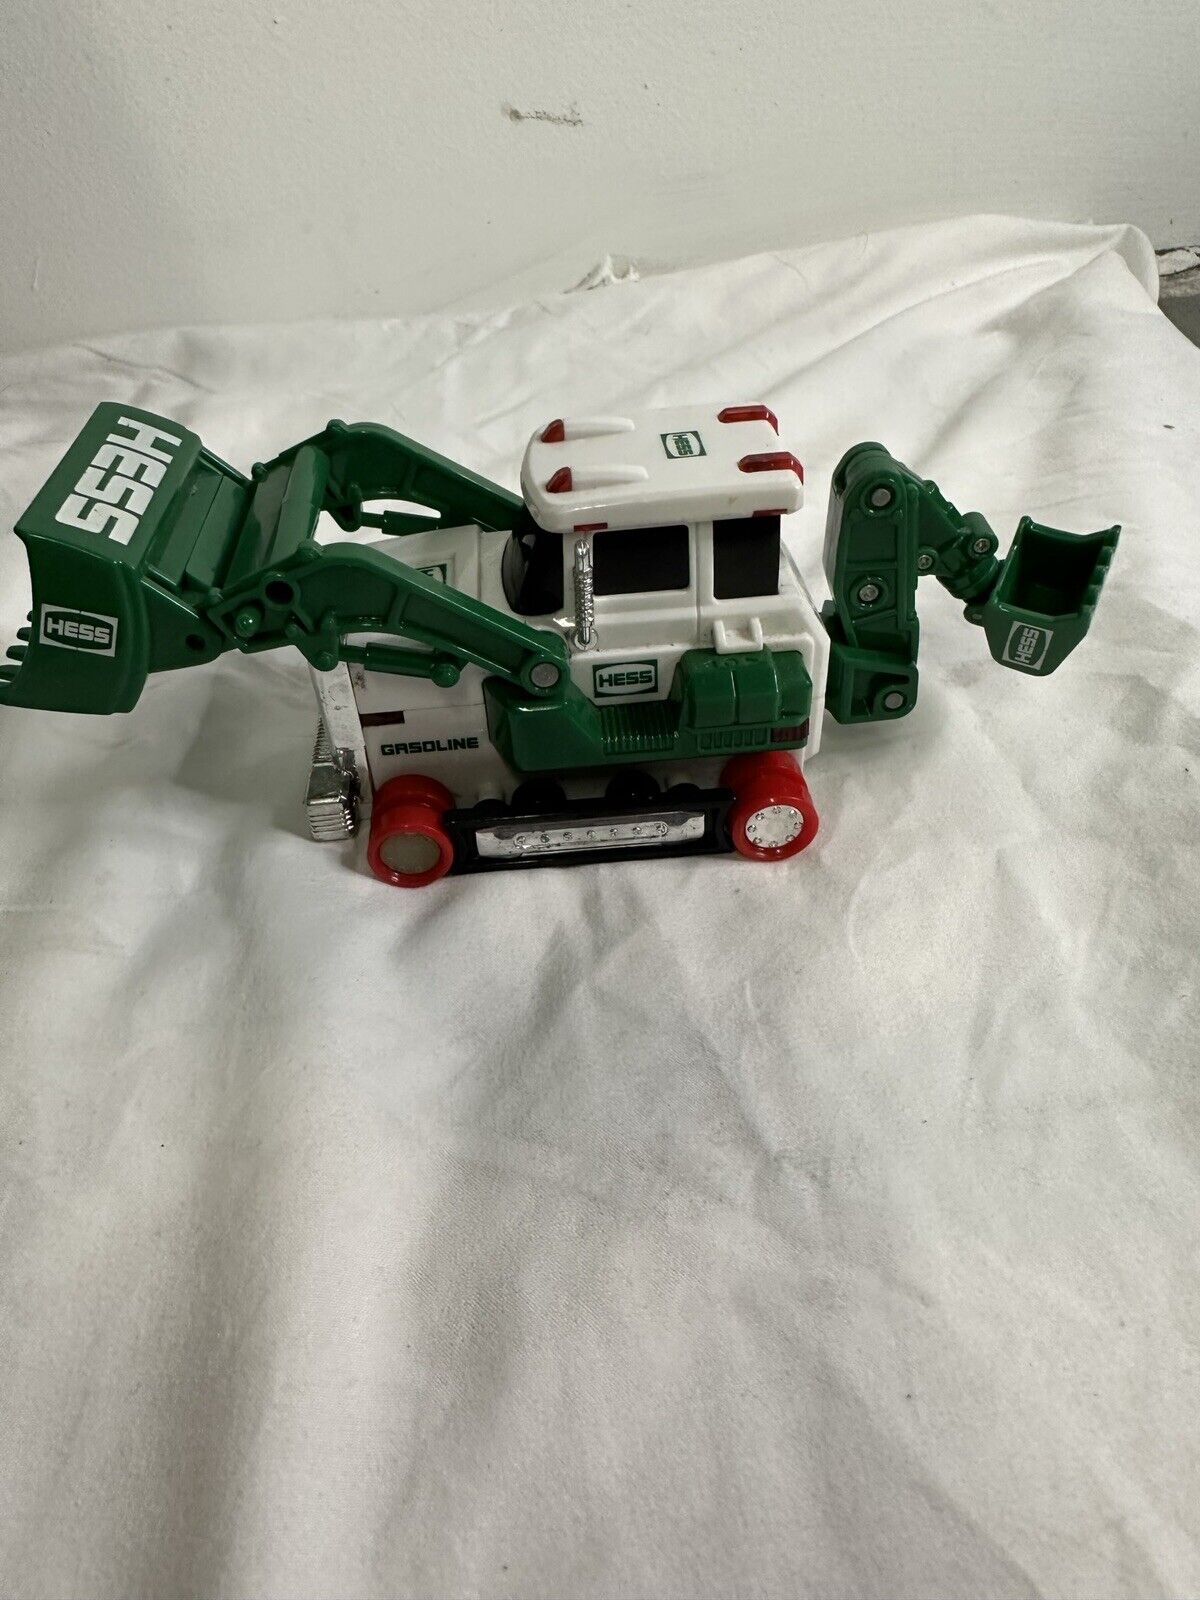 Hess 2013 Toy Tractor With Backhoe And Scoop Working Lights And Wheels